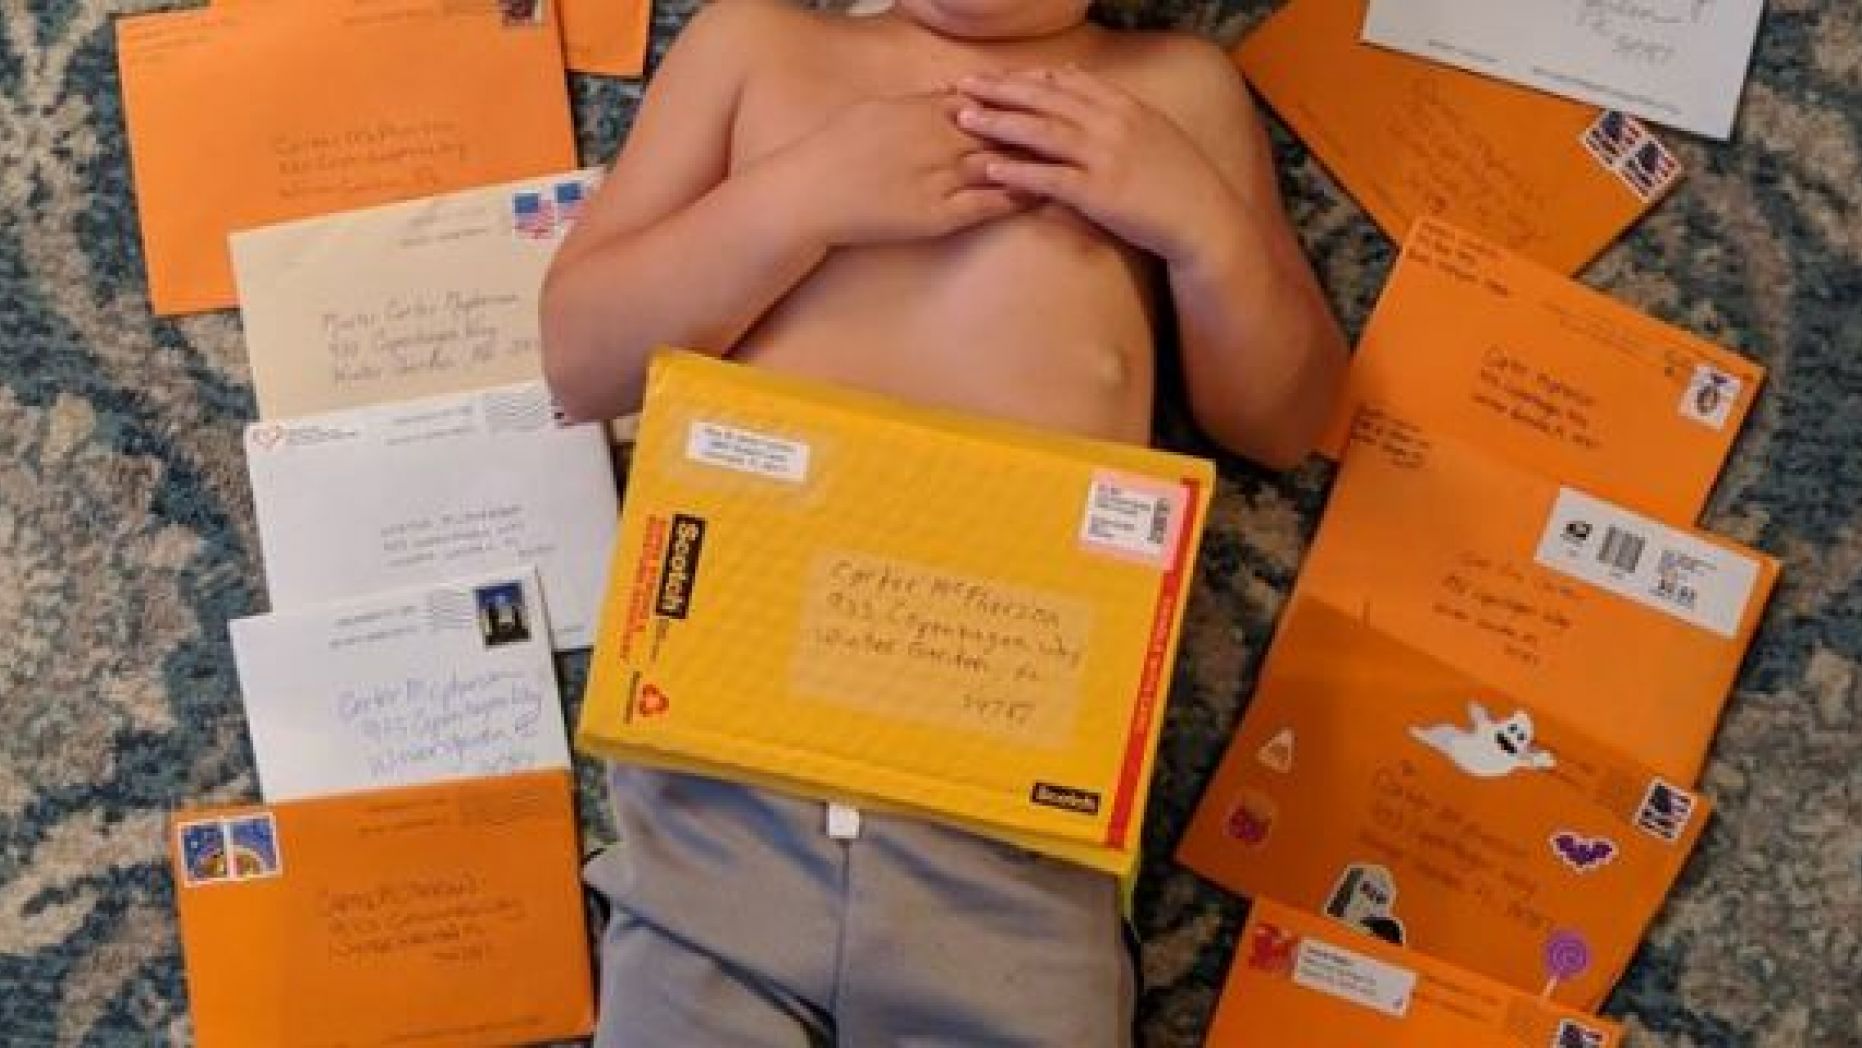 Tiffany McPherson turned to social media this year to do something nice for her son Carter, who is currently undergoing chemotherapy as part of his treatment for leukemia.